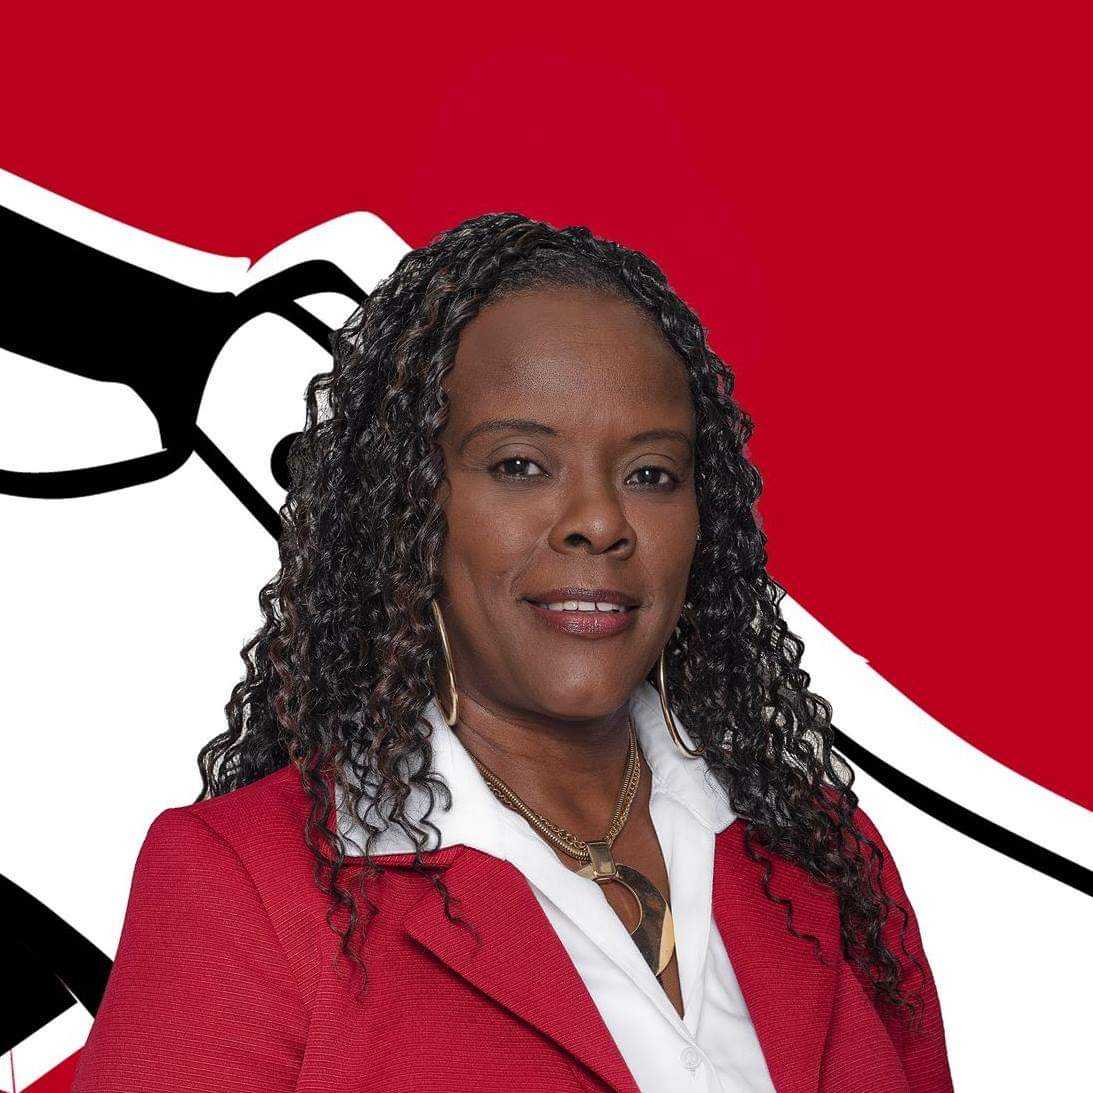 DLP Formally Officially Launches Educator Gretta Roberts As Its New Candidate For Morne Jaune/Riviere Cyrique